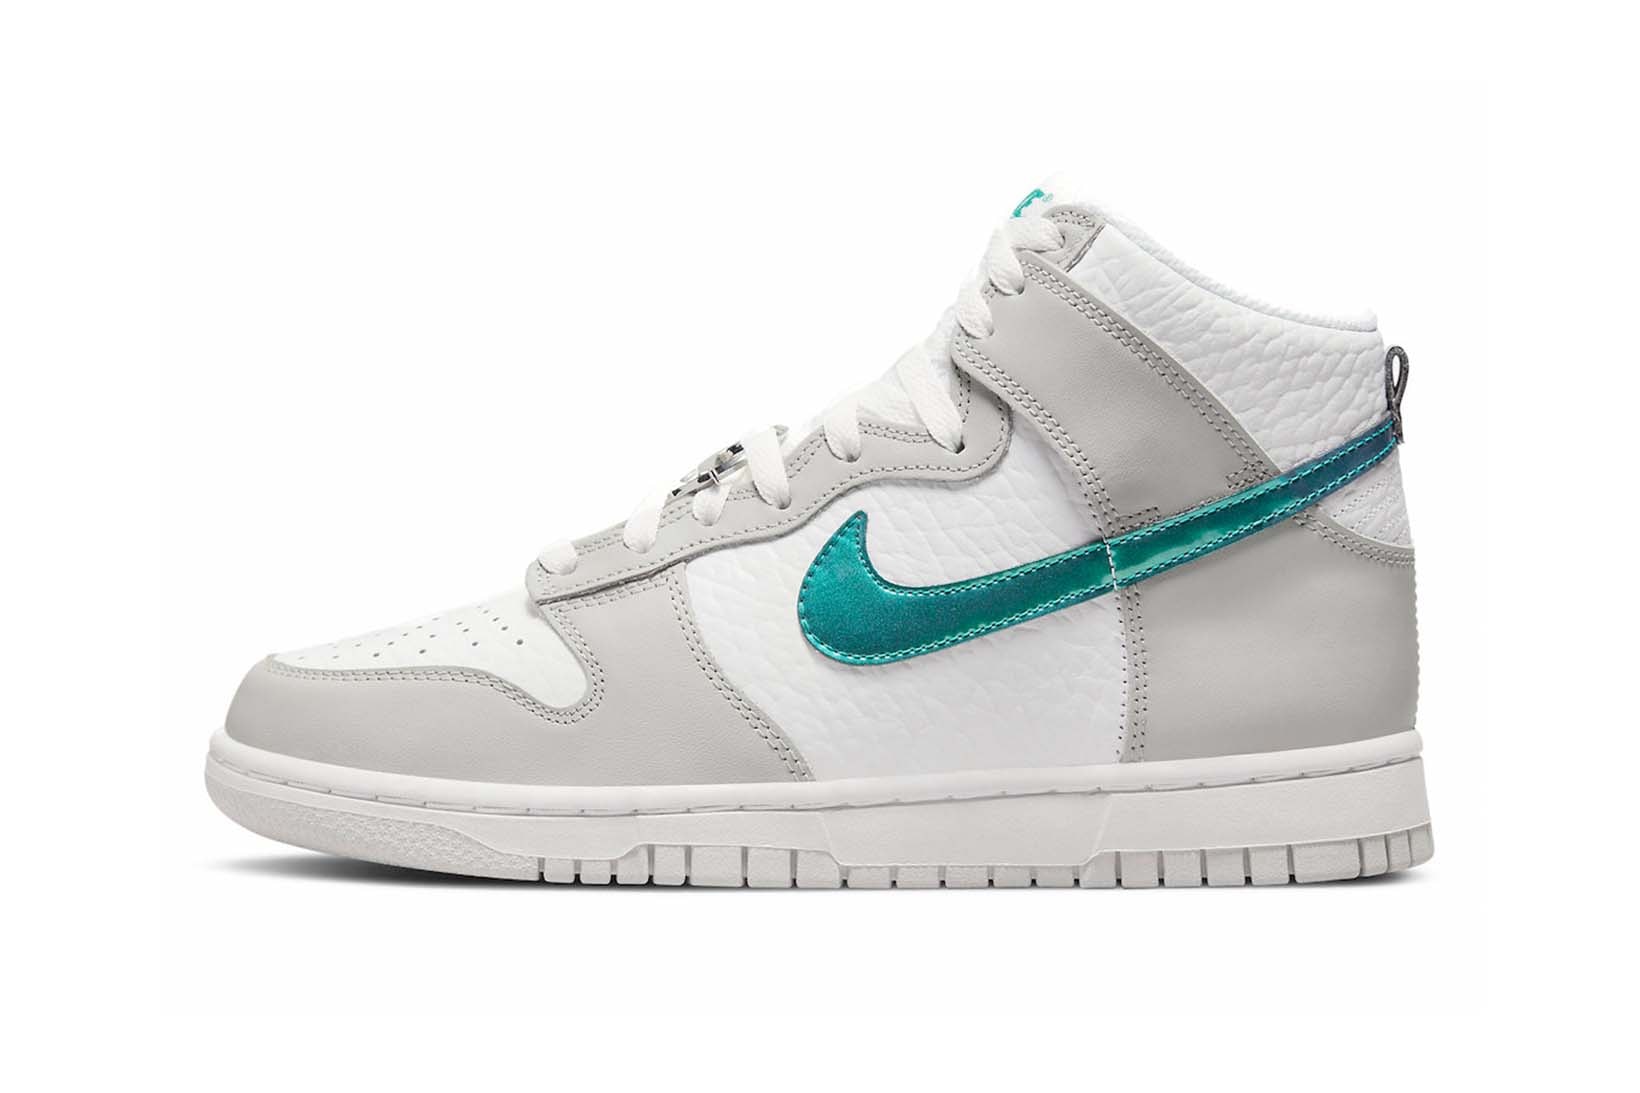 Nike Dunk High Ring Bling White Gray Teal Swoosh Dubrae Price Release Date